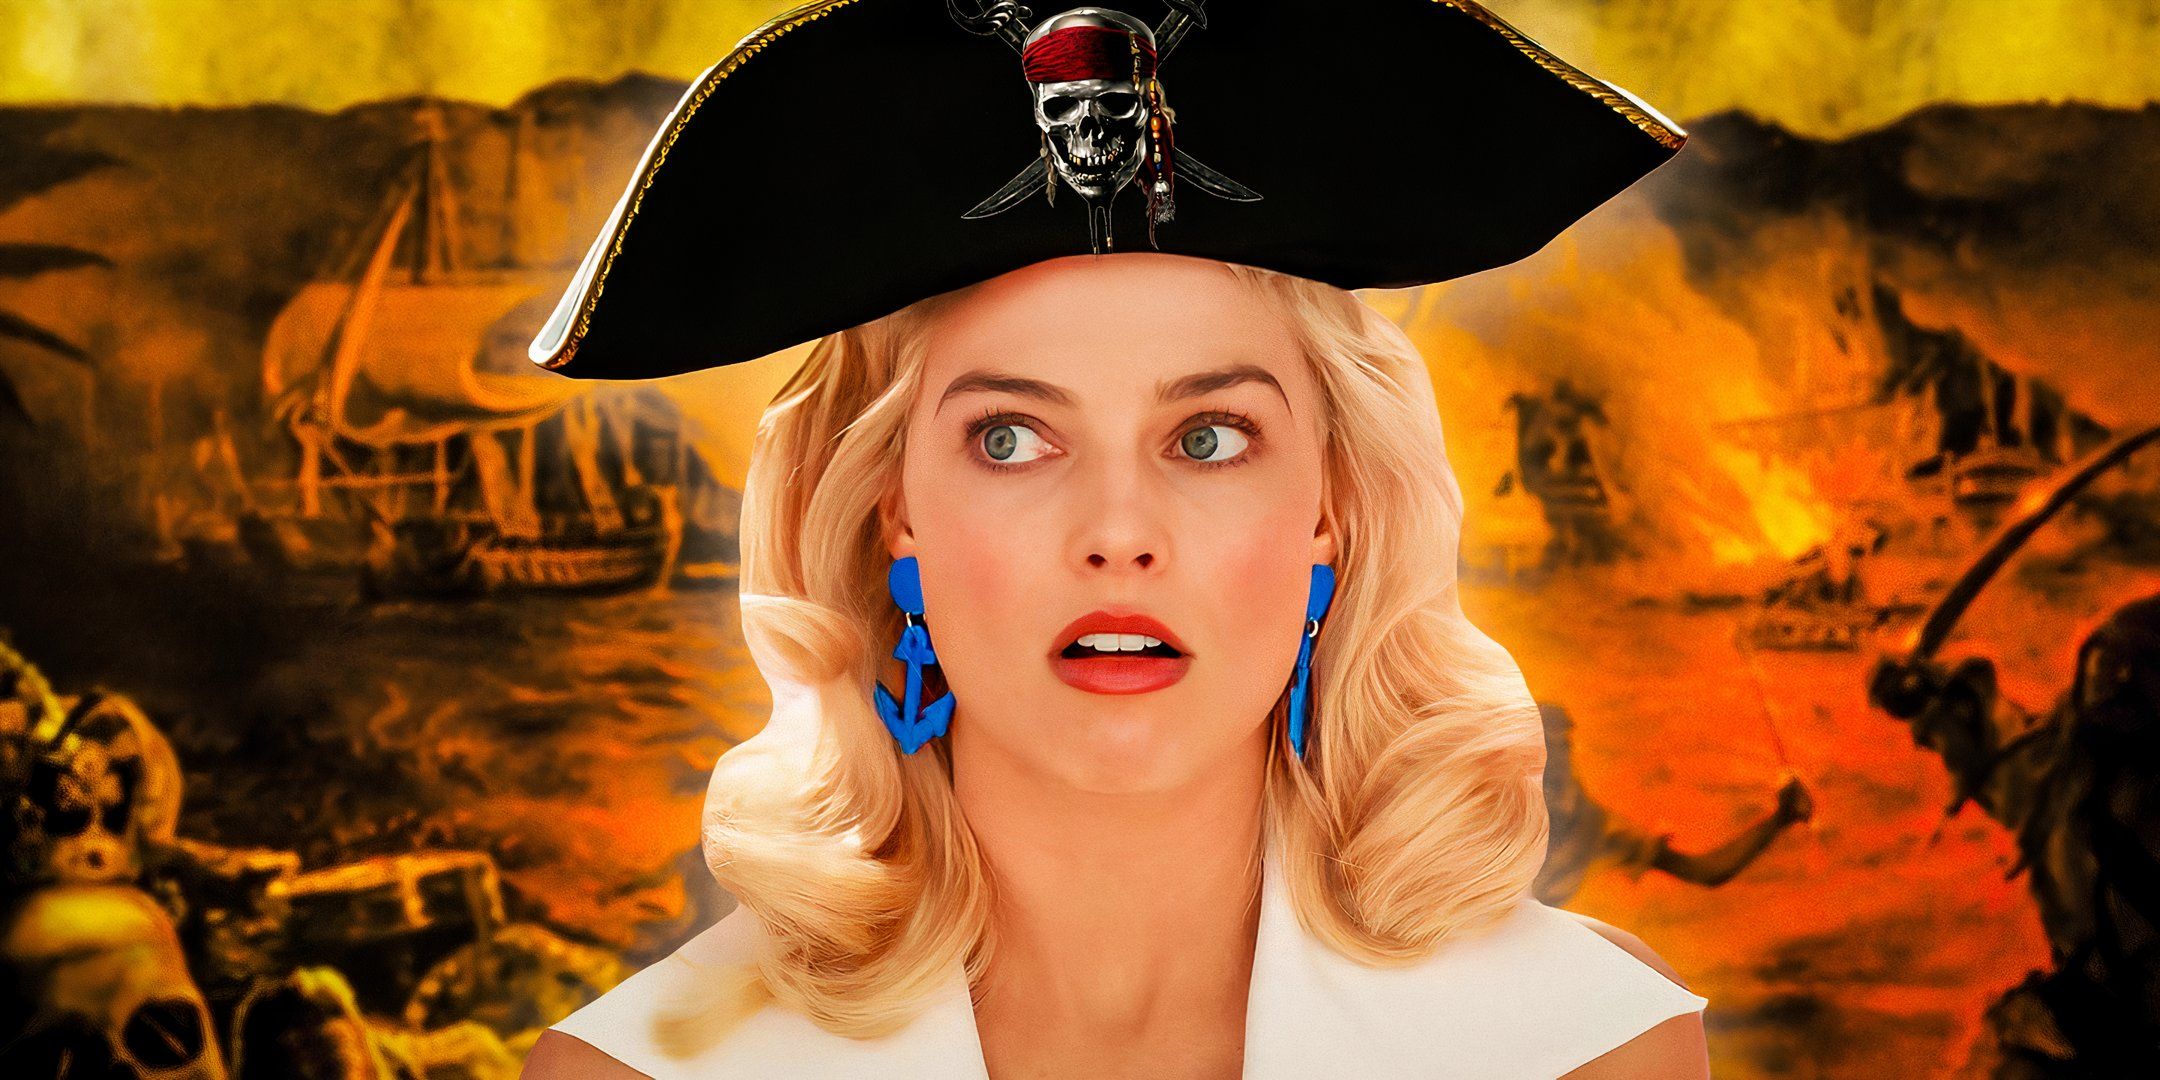 Margot Robbie as Barbie wearing a pirate's hat with the Pirates of the Caribbean logo on it